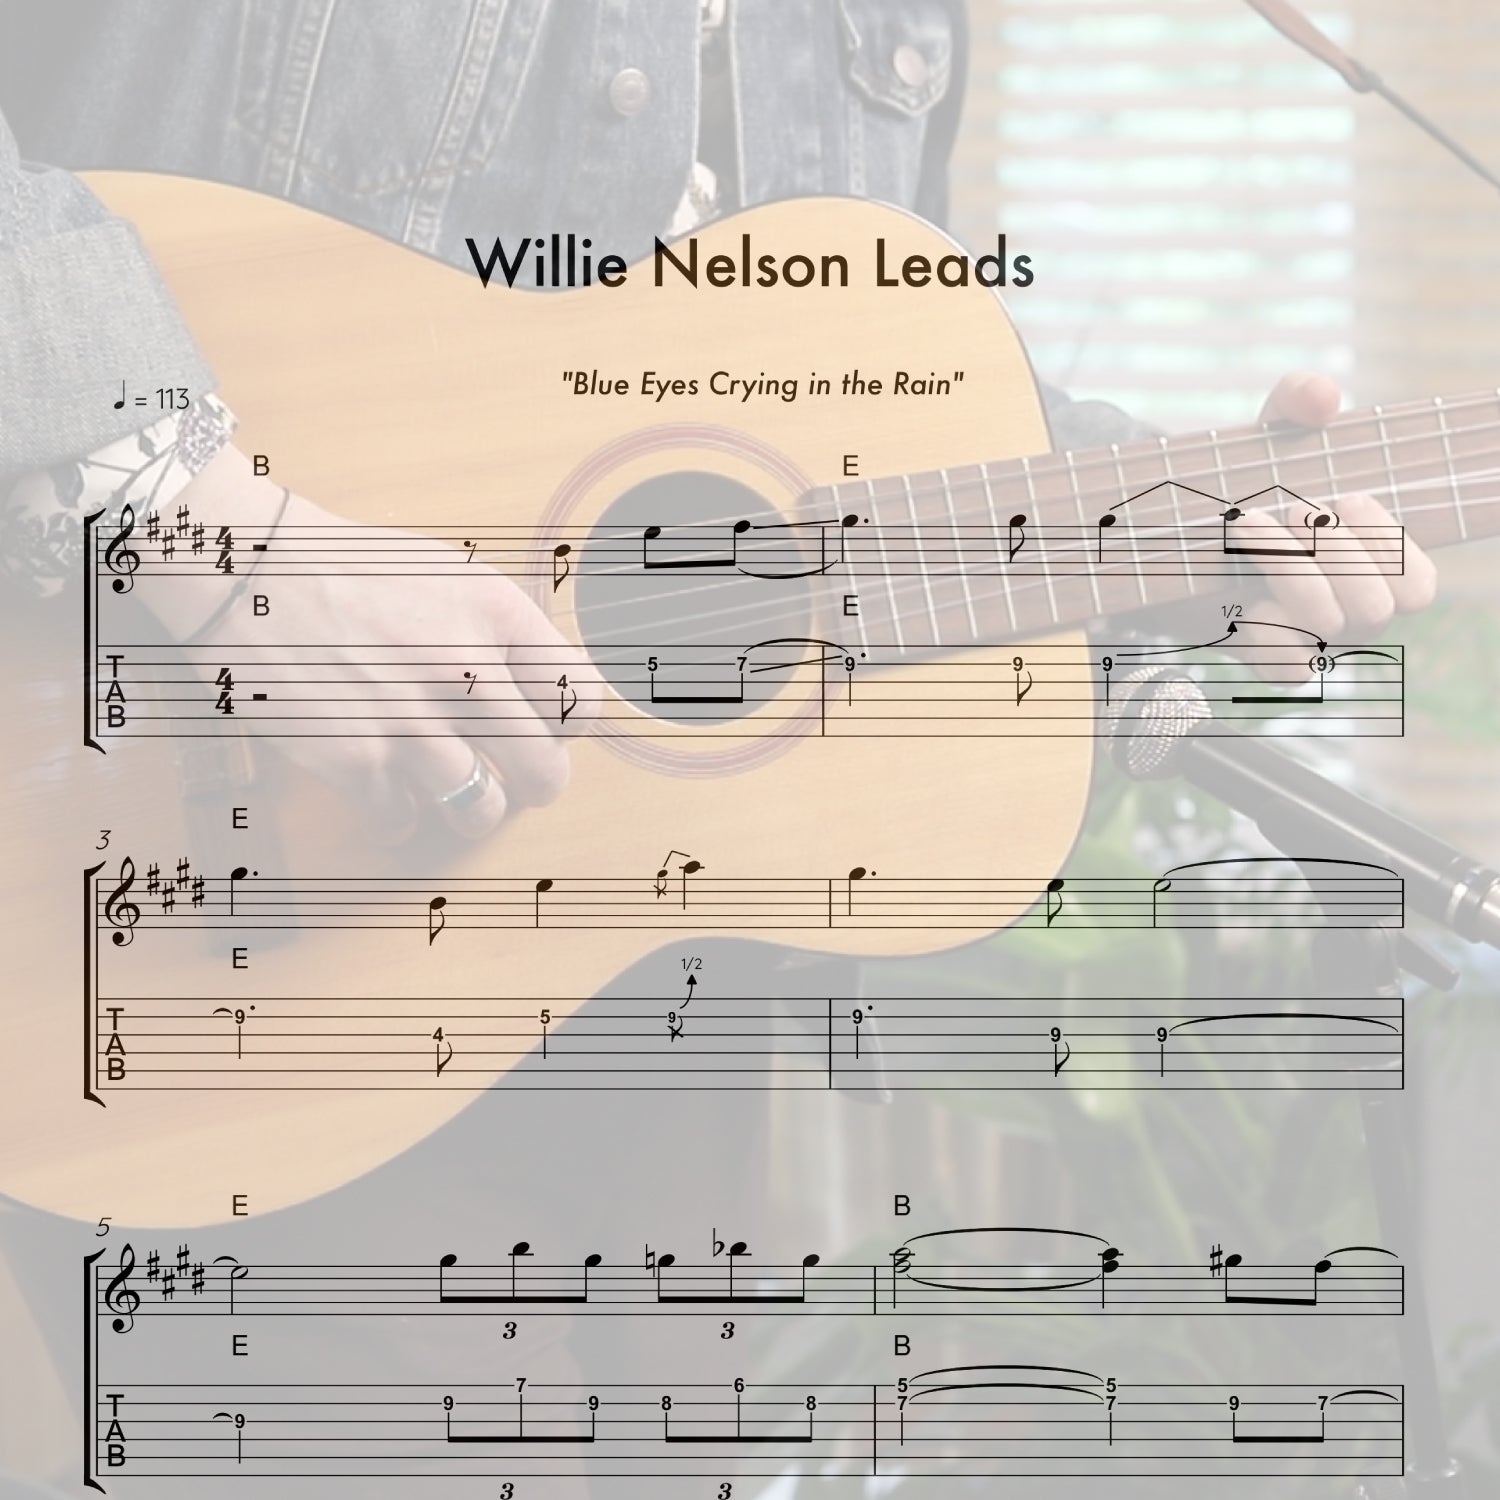 Willie Nelson Leads